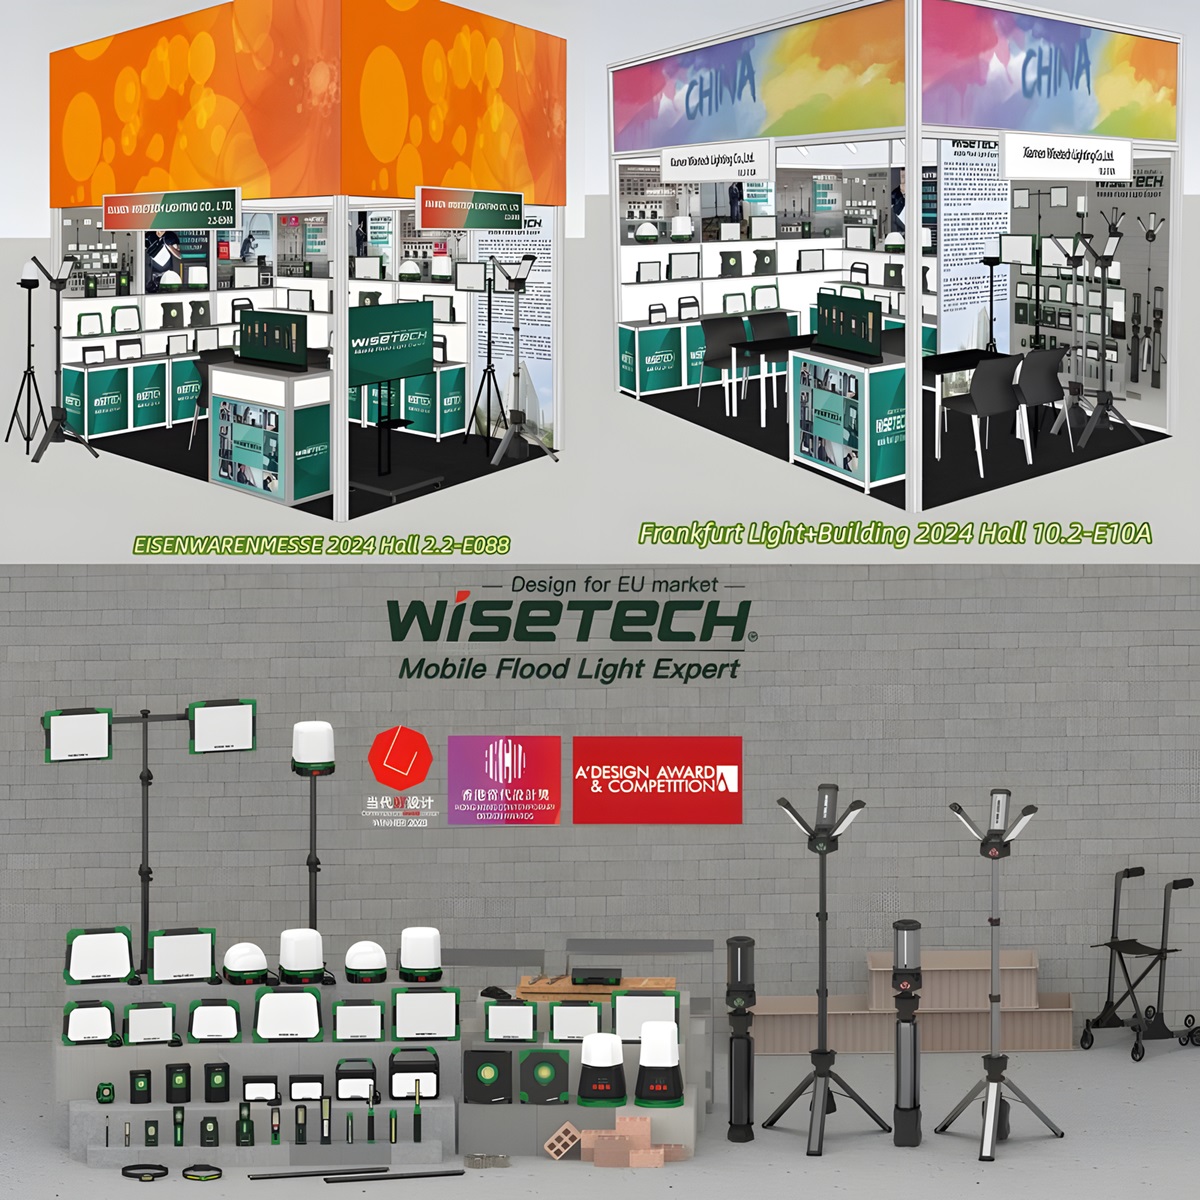 Wisetech to Attend the Cologne International Hardware Fair and the Frankfurt Light+Building Fair